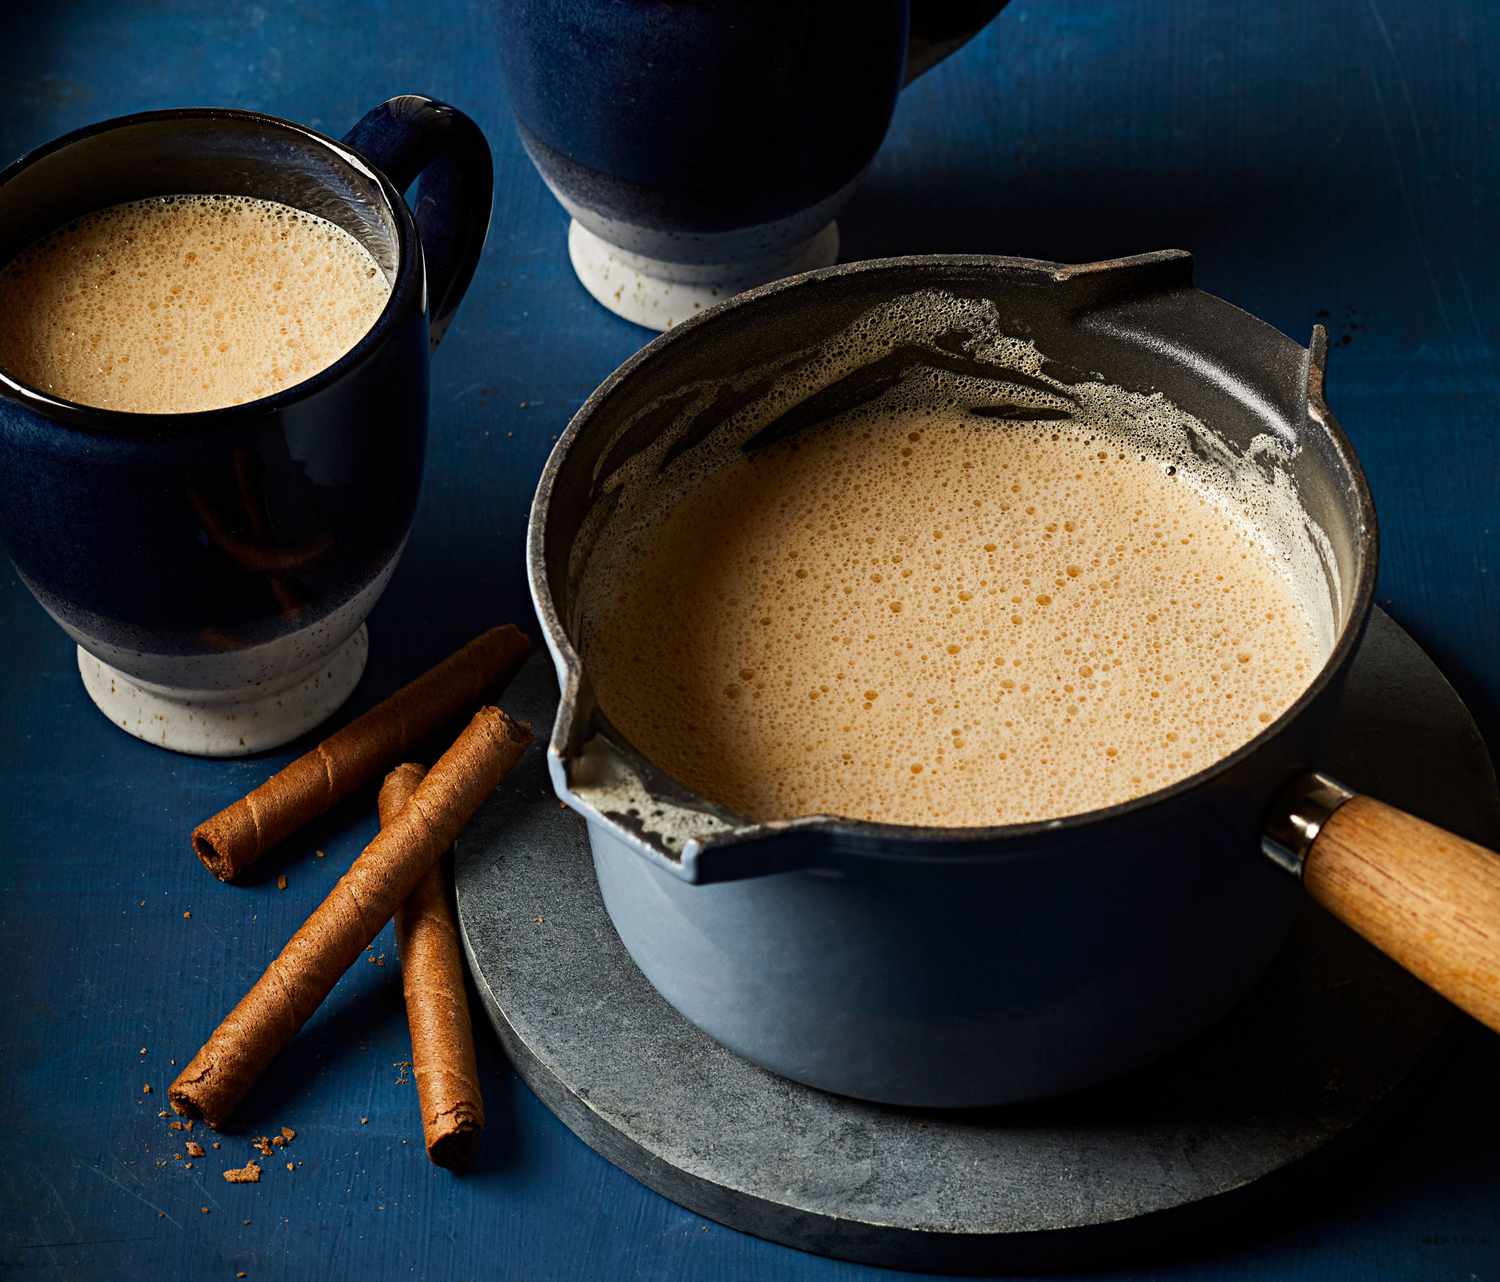 Roasted White Hot Chocolate with Malted Milk